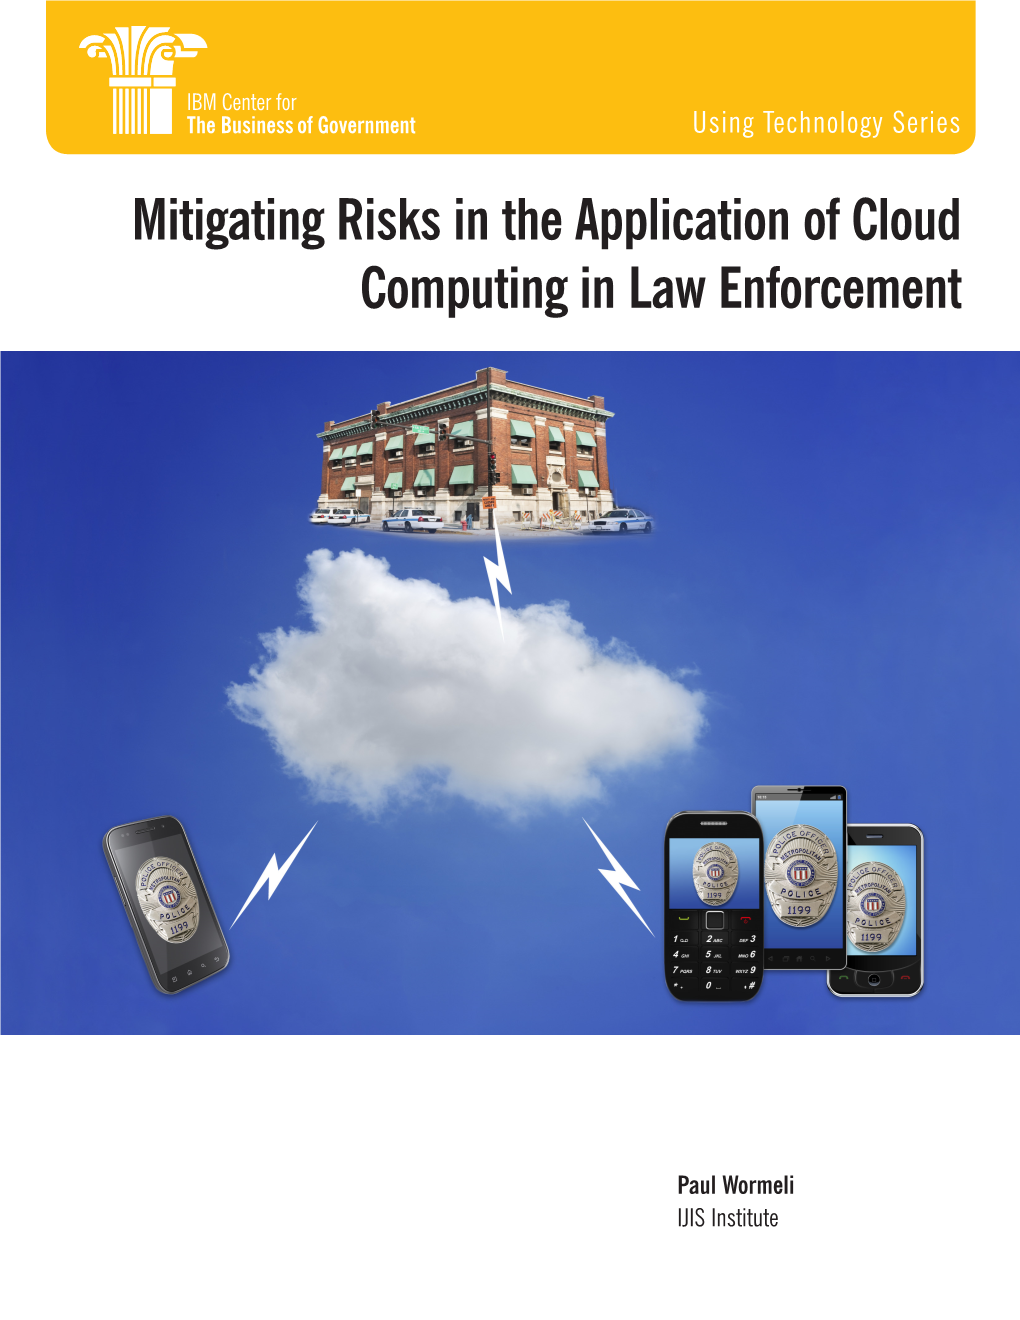 Mitigating Risks in the Application of Cloud Computing in Law Enforcement